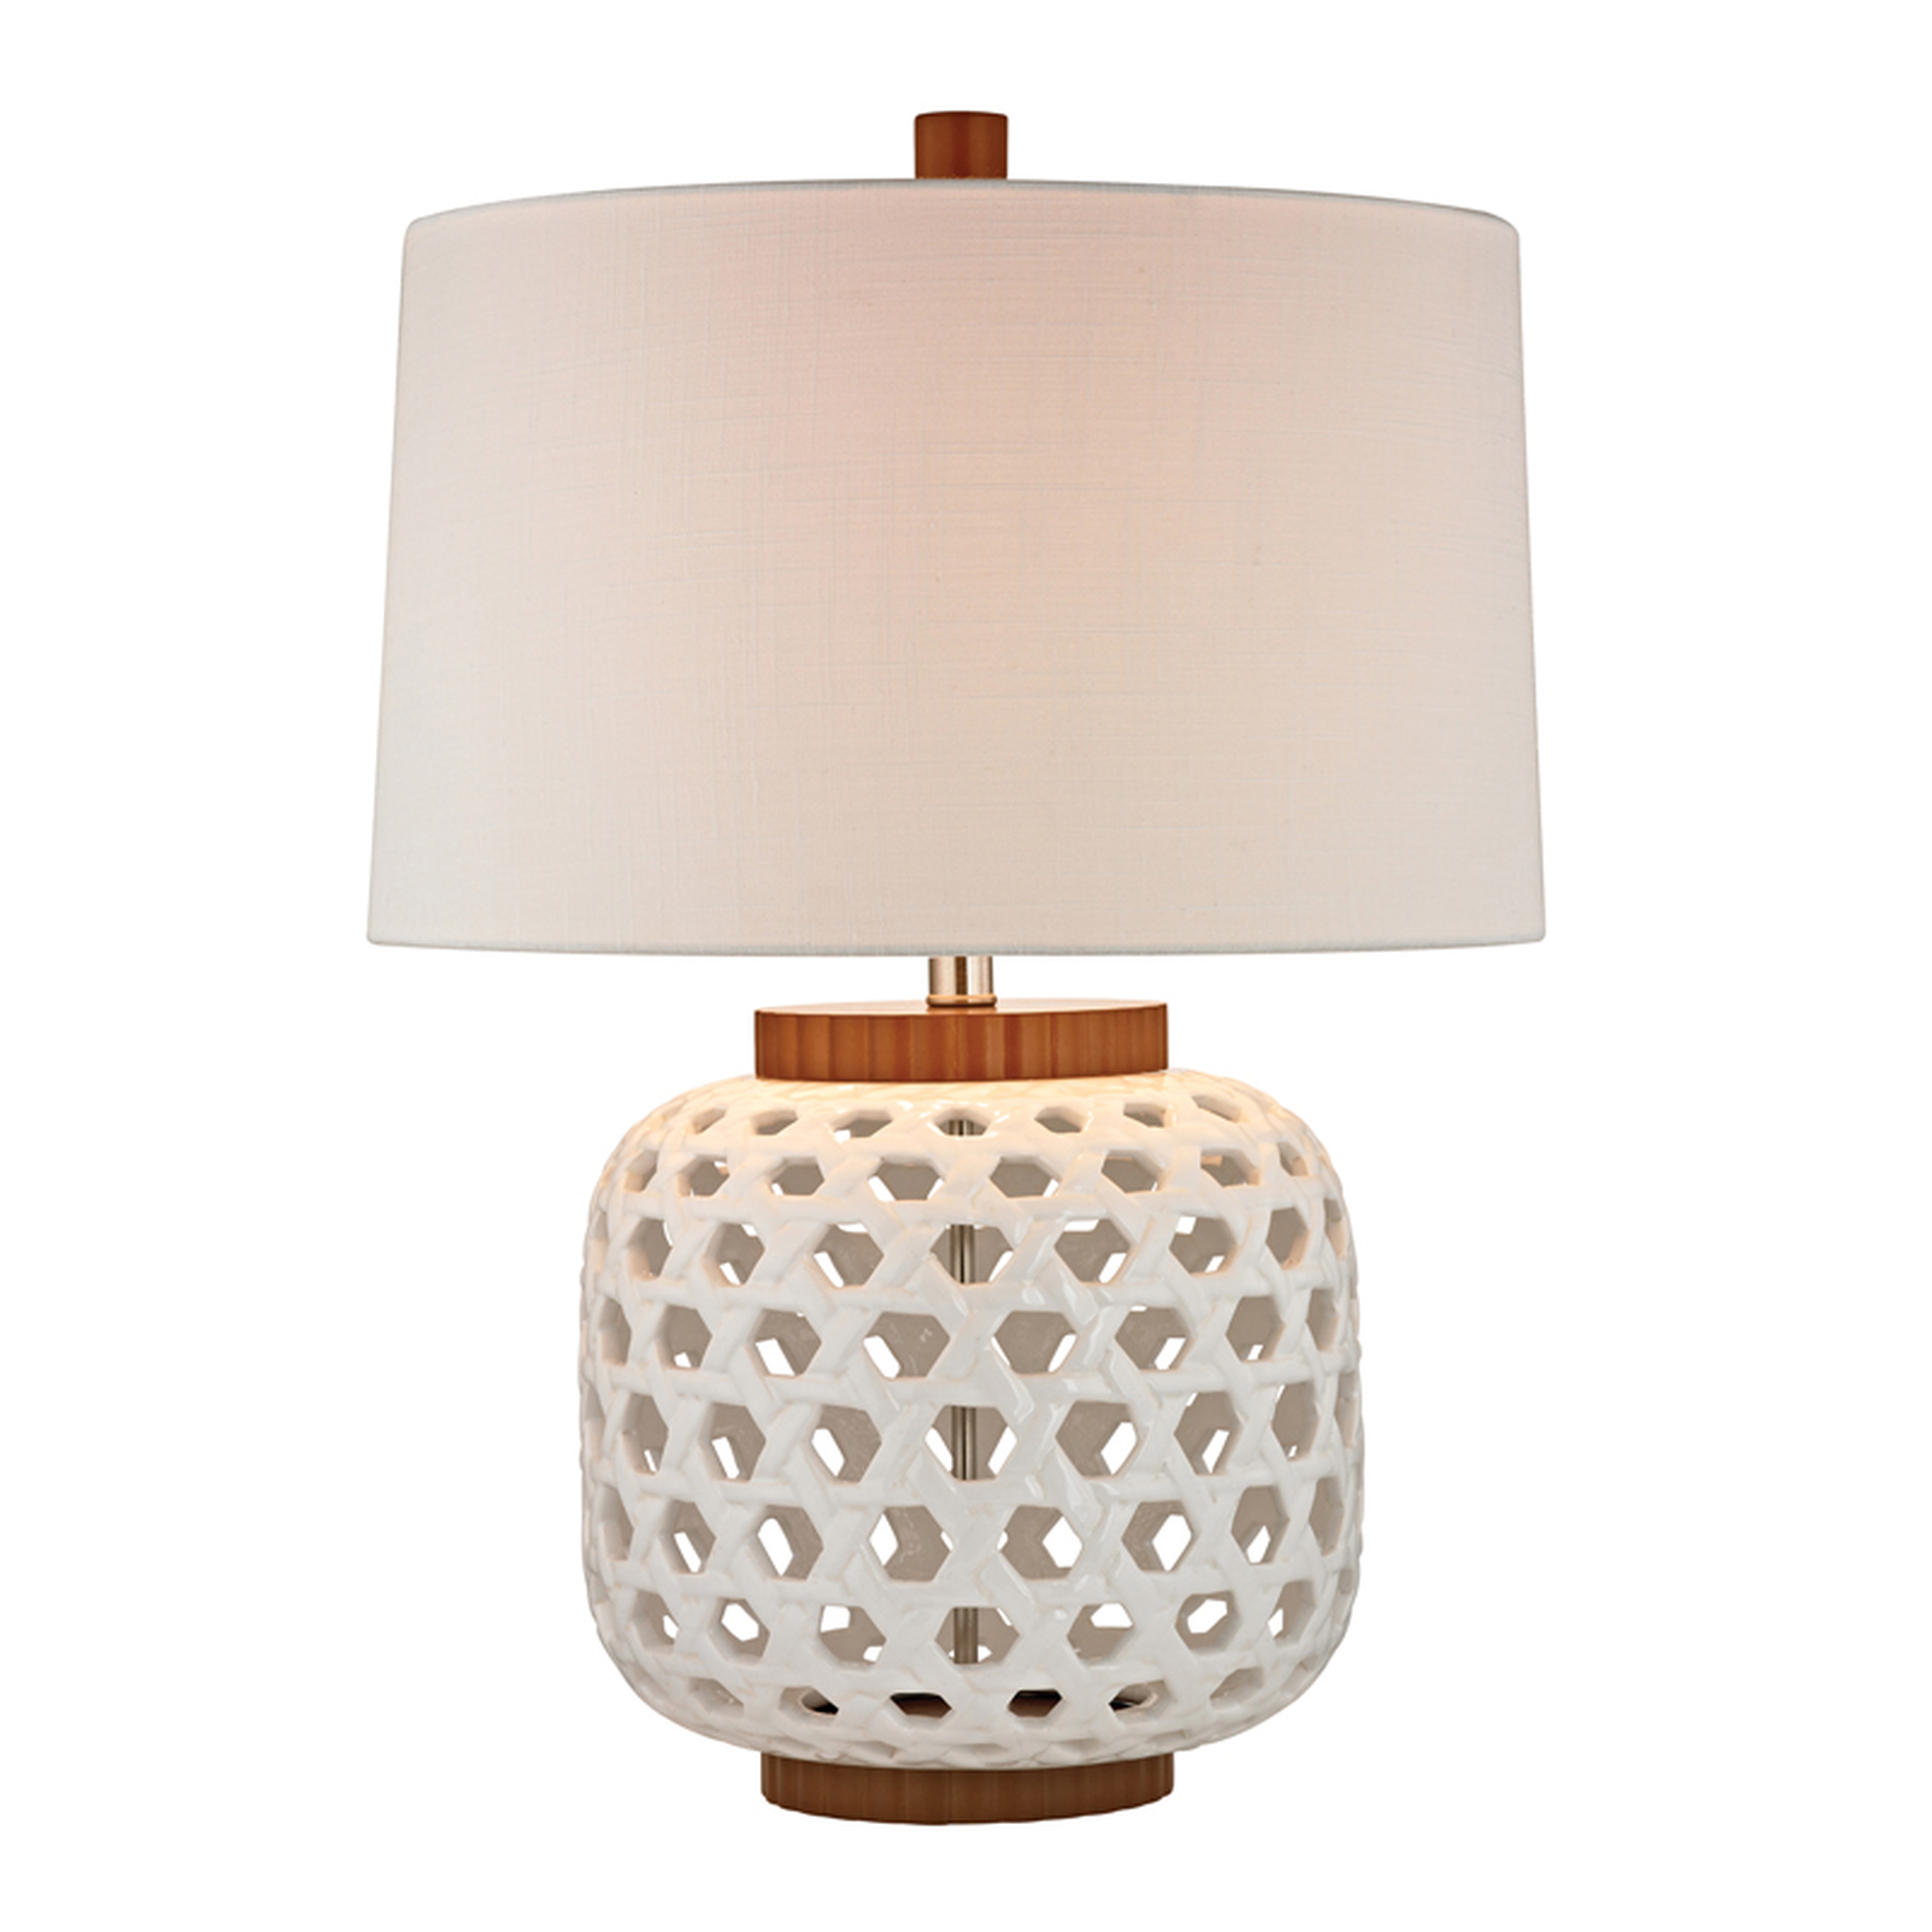 Woven Ceramic Table Lamp In White And Wood Tone - Elk Home